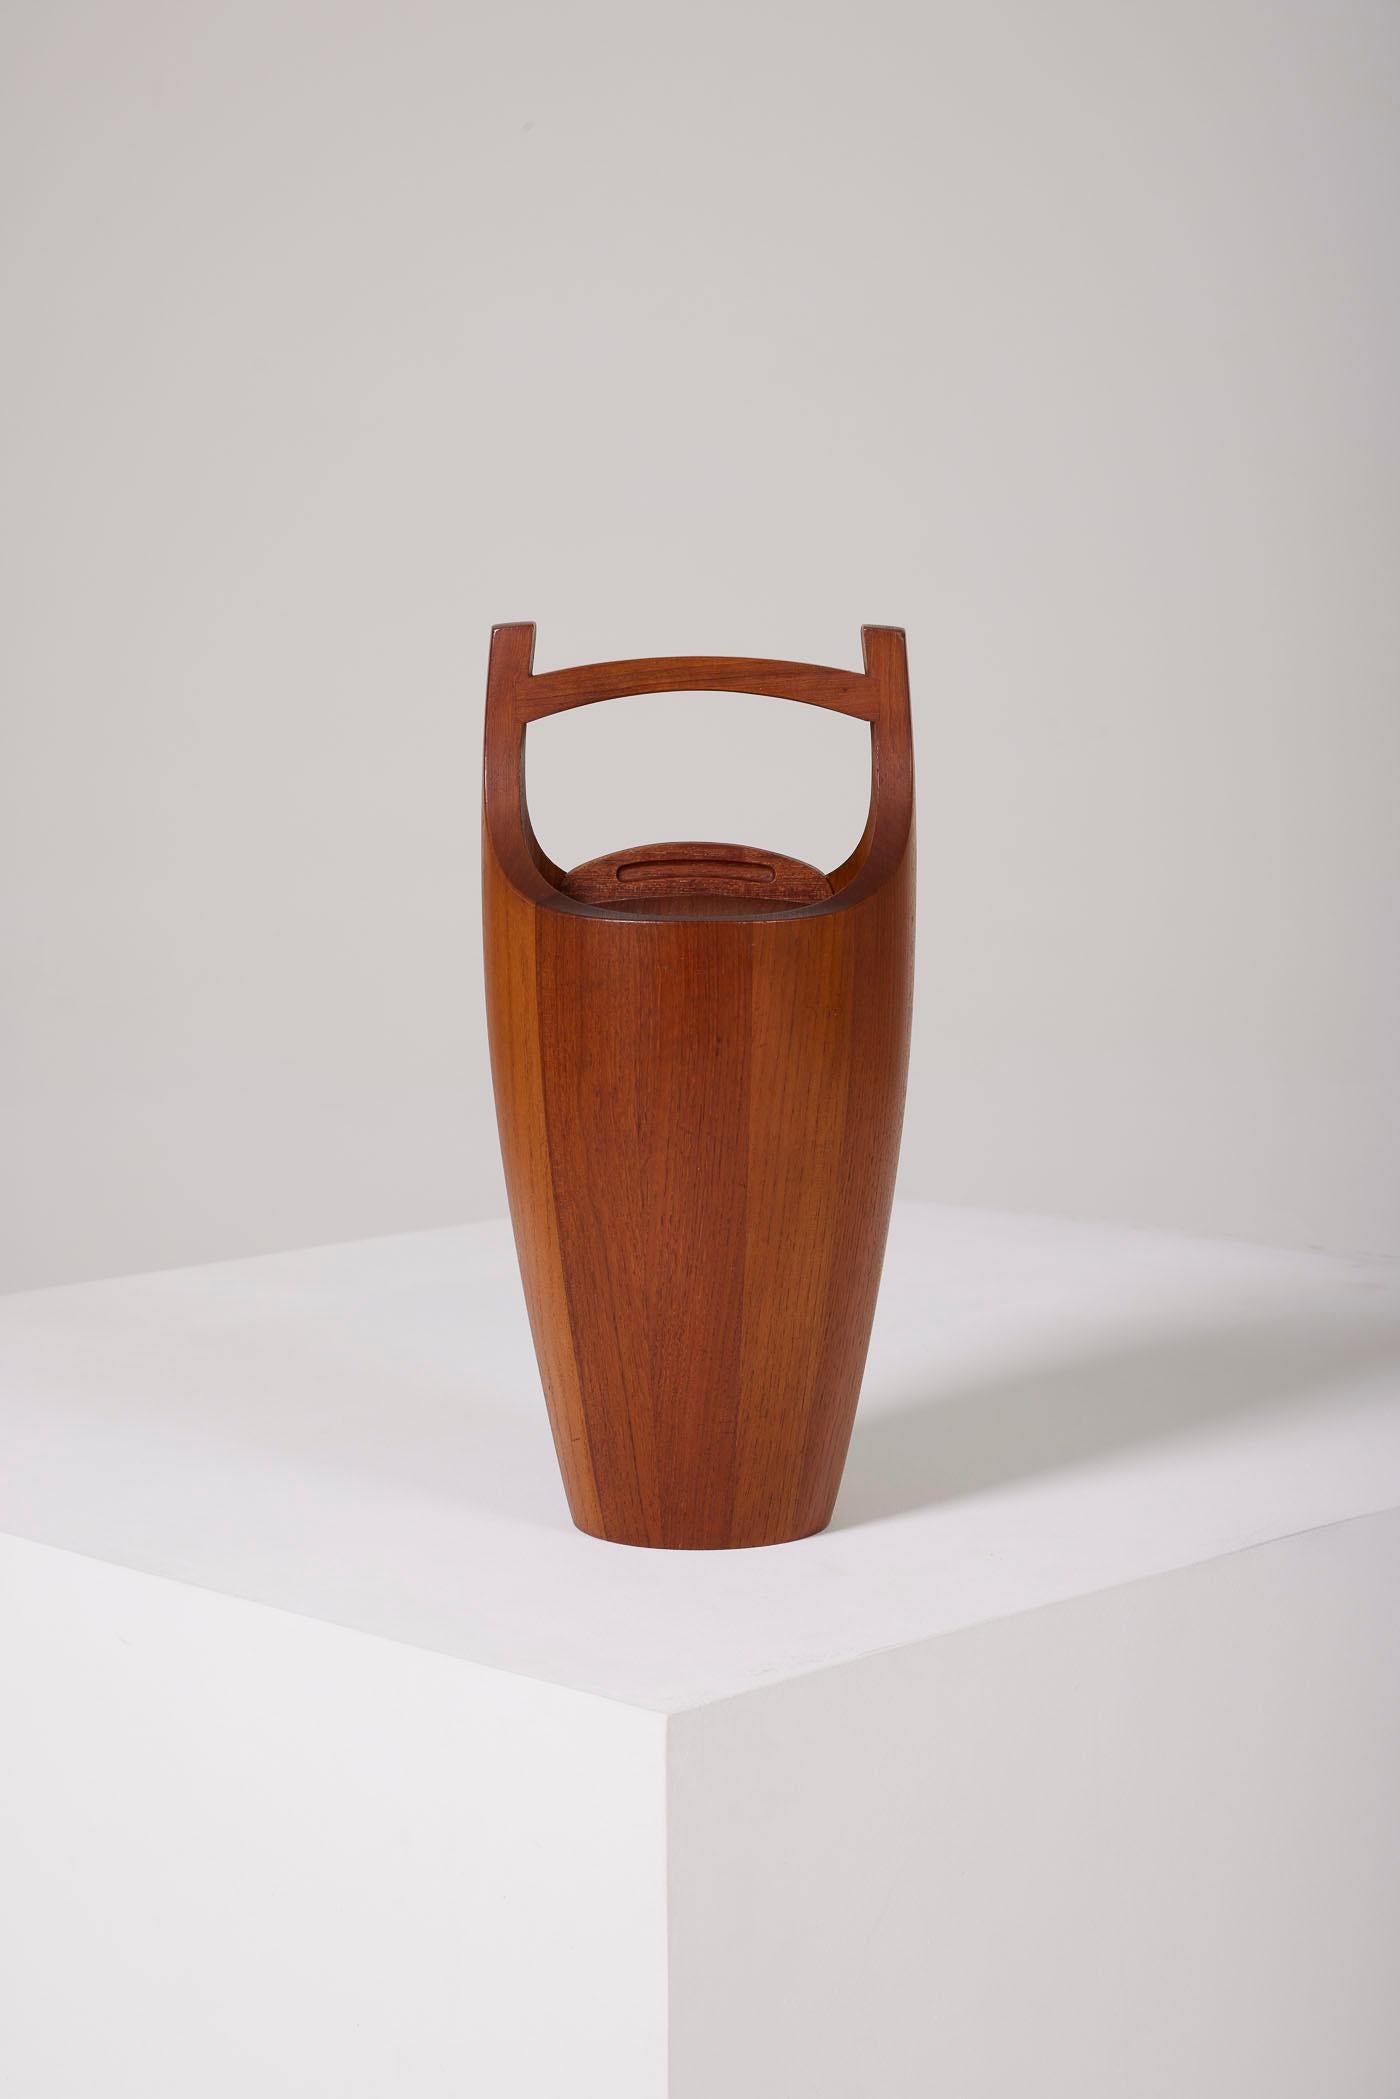 Ice bucket from the Congo by Jens Harald Quistgaard, Denmark, 1960s. Very good overall condition.
DV315